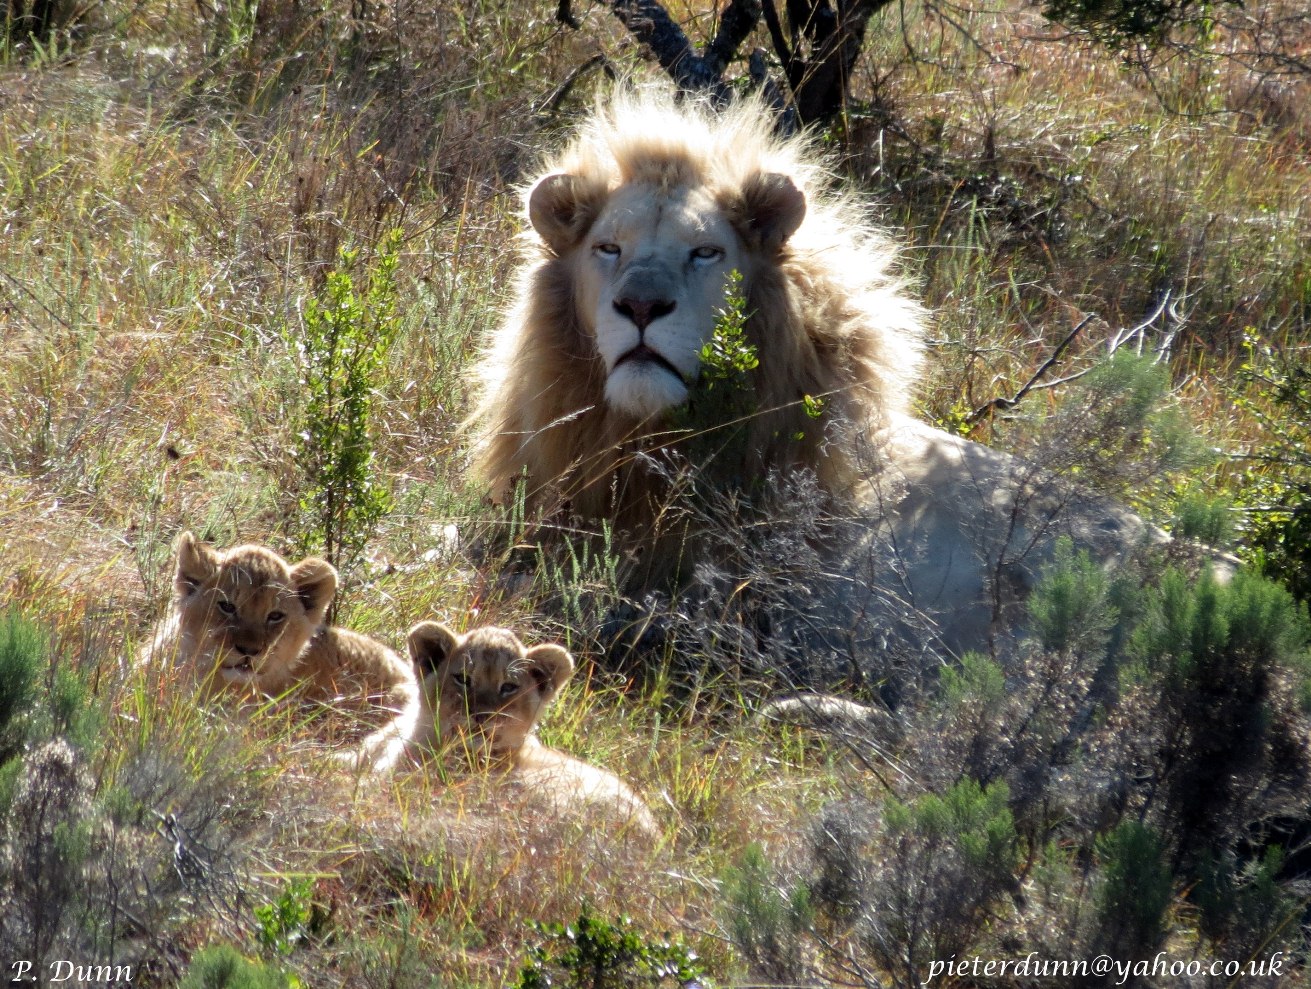 A white lion and its cubs sit in the overgrowth on the Pumba reserve